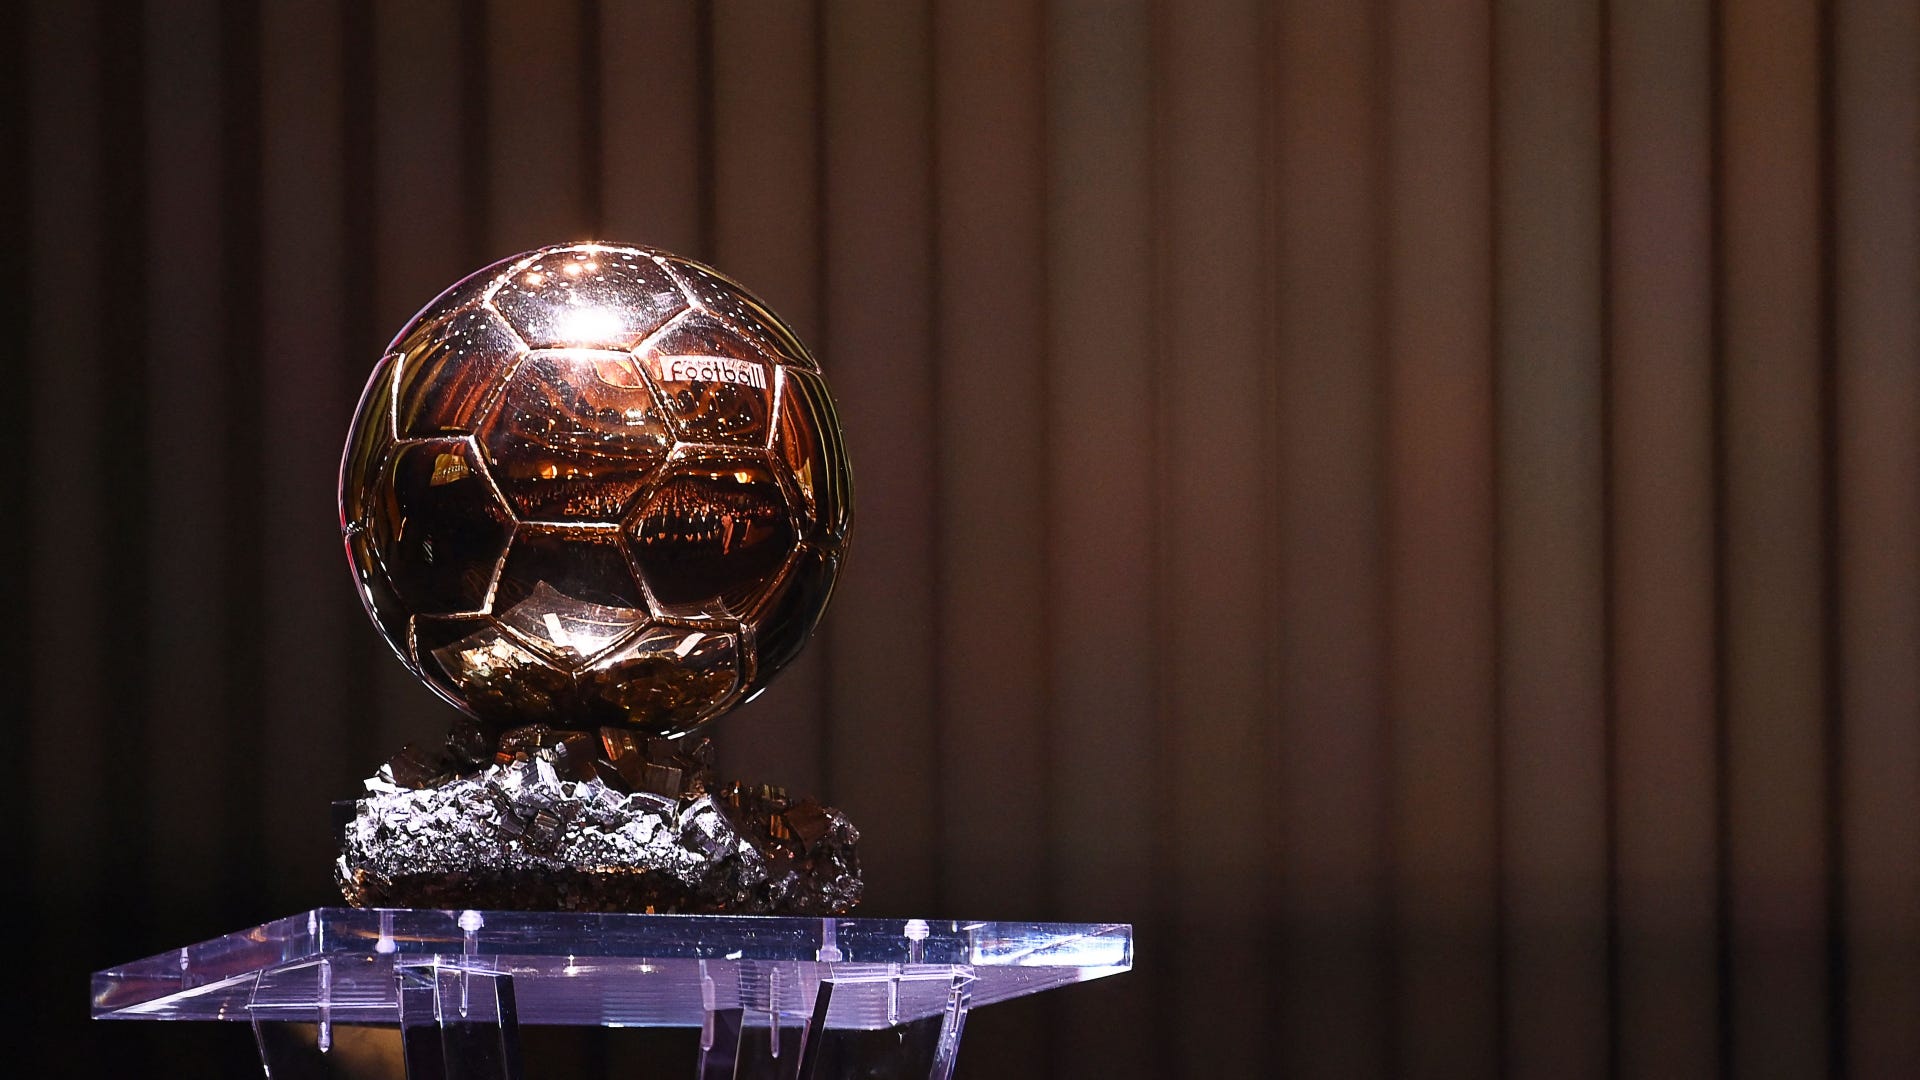 Ballon d'Or 2021: What was the selection process for voting